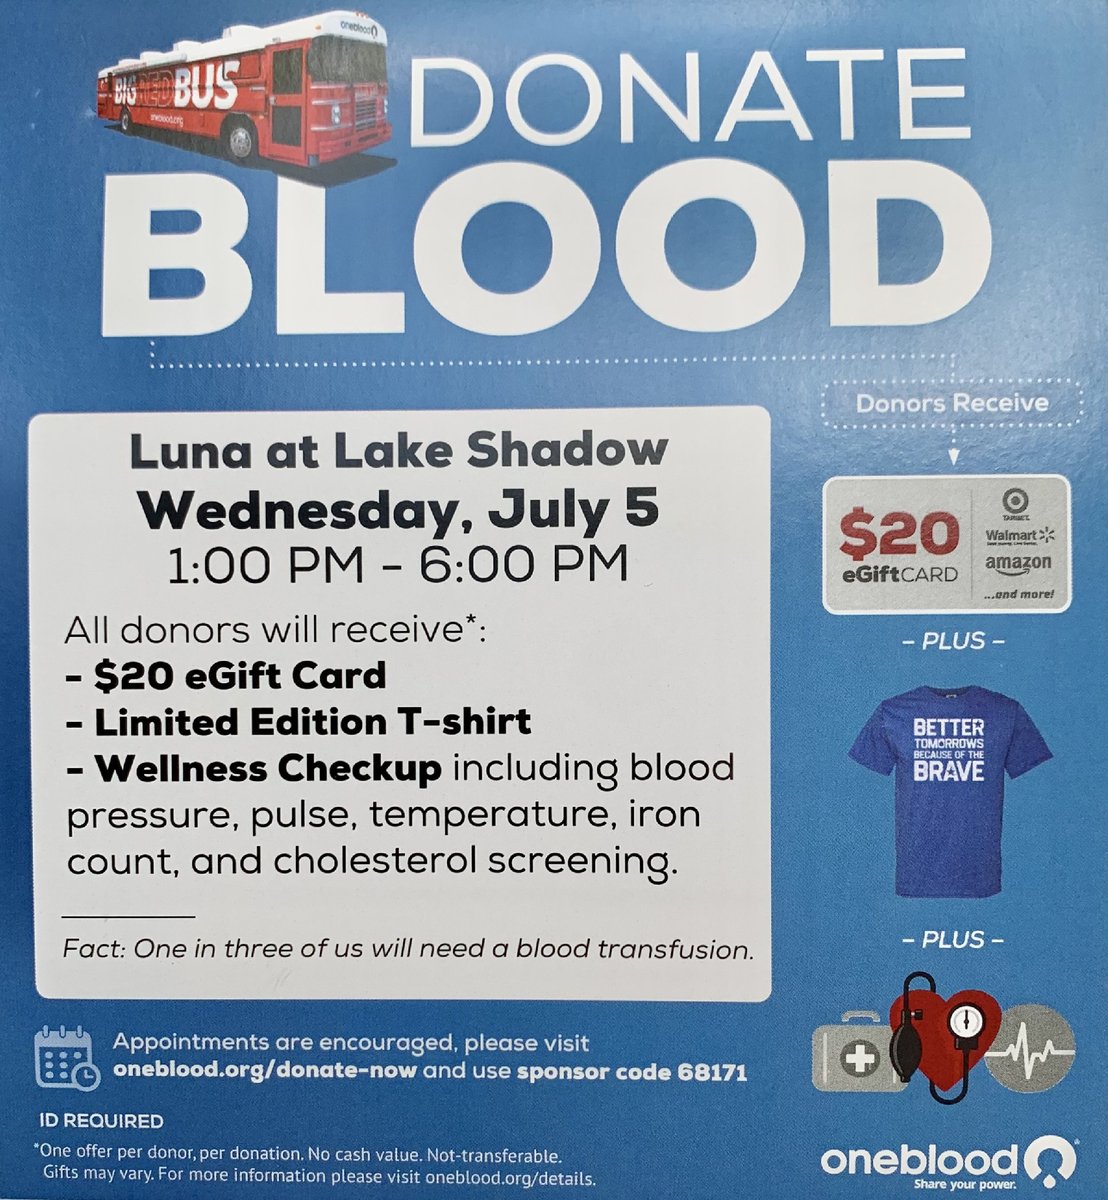 Better Tomorrows Because of the Brave OneBlood Drive TODAY from 1pm - 6pm 🩸 🚌 💉
All donors receive a $20 egift card, 👕, and wellness check-up!

#donateblood #donate #give #blood #cushwake #cushwakeliving #residents #residentsgiveback #oneblood #blooddrive #bigredbus...